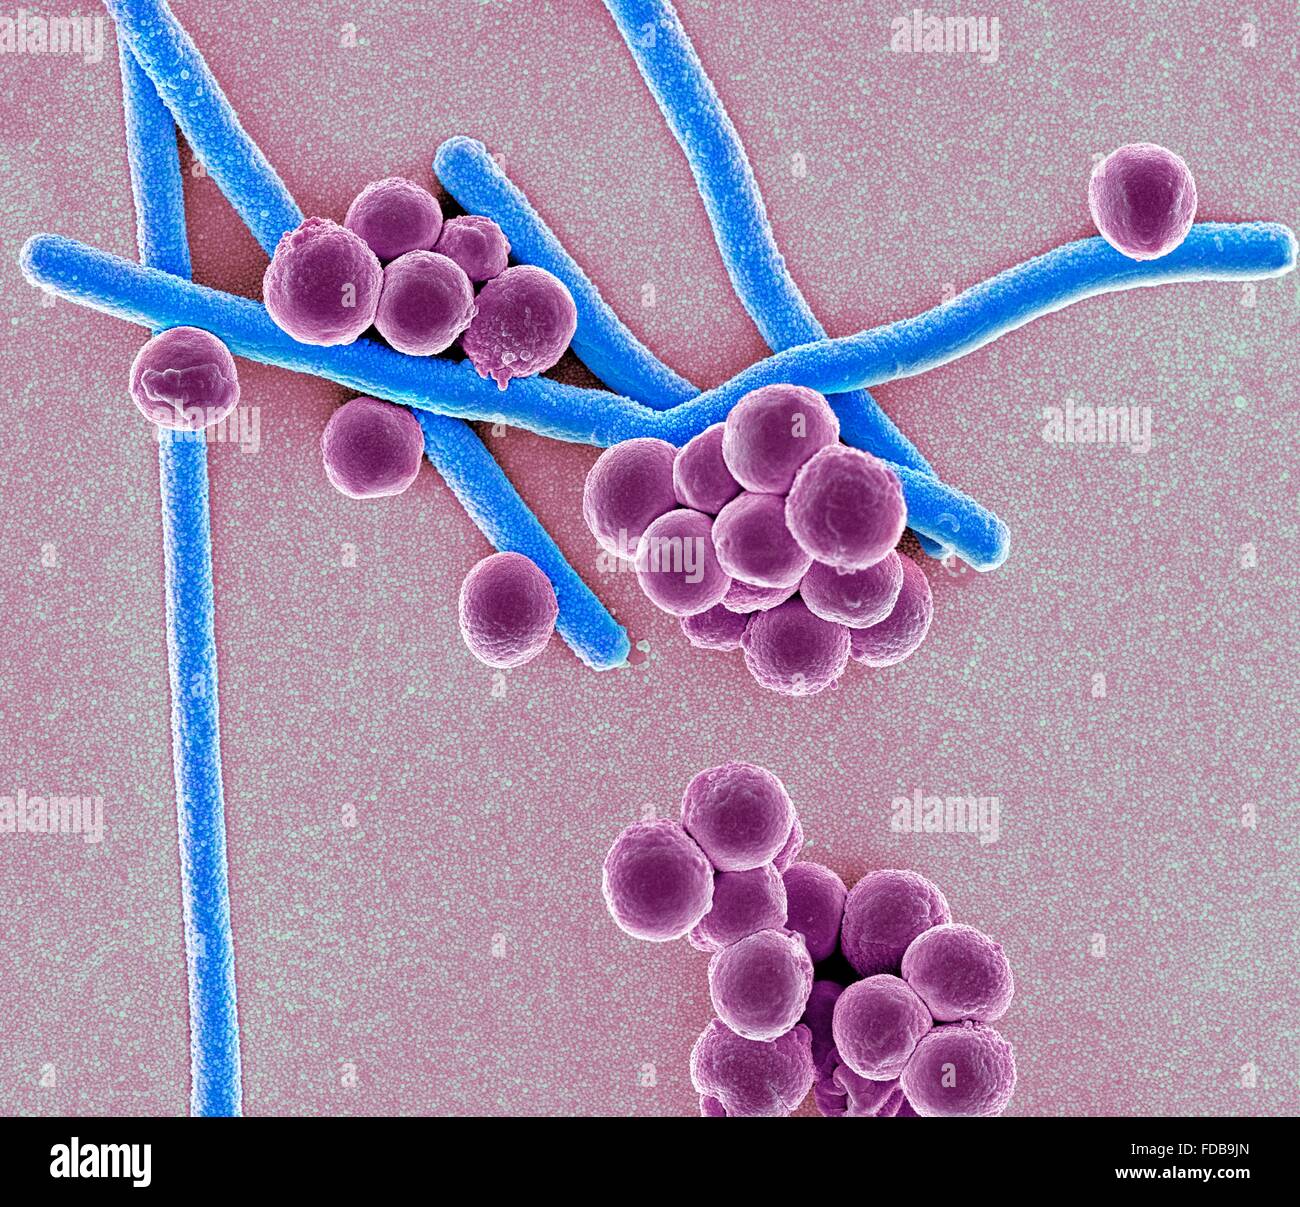 Coloured scanning electron micrograph (SEM) of rod-shaped (bacillus) and round (coccus) bacteria. Stock Photo